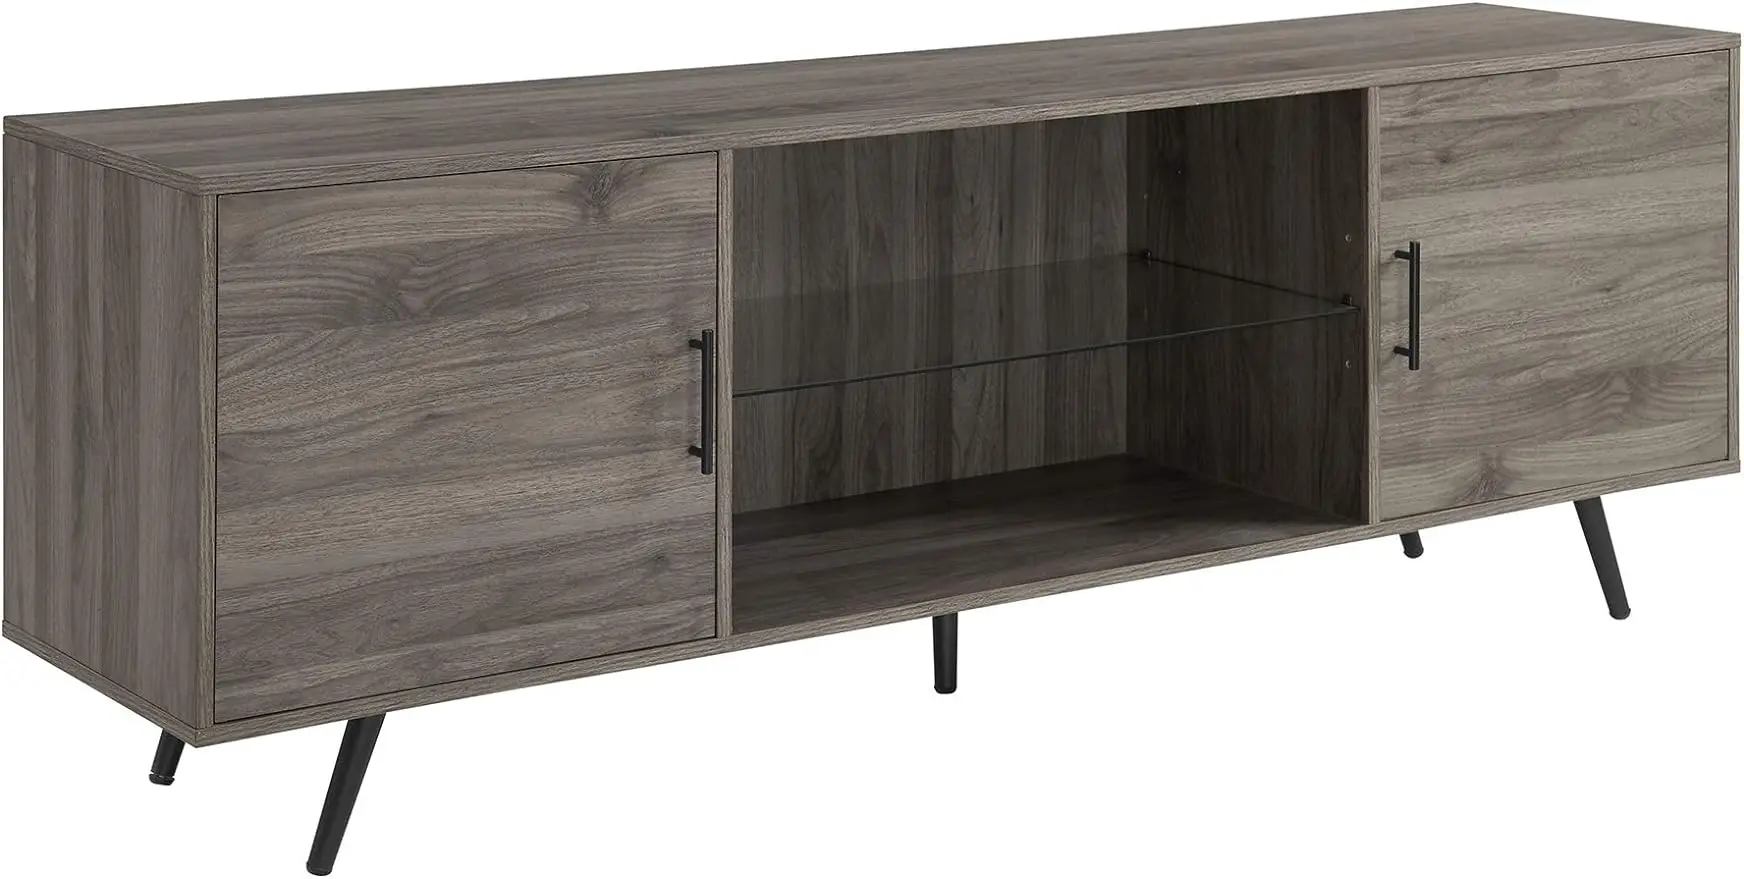 

Walker Edison Saxon Mid Century Modern 2 Door Glass Shelf TV Stand for TVs up to 80 Inches, 70 Inch, Grey